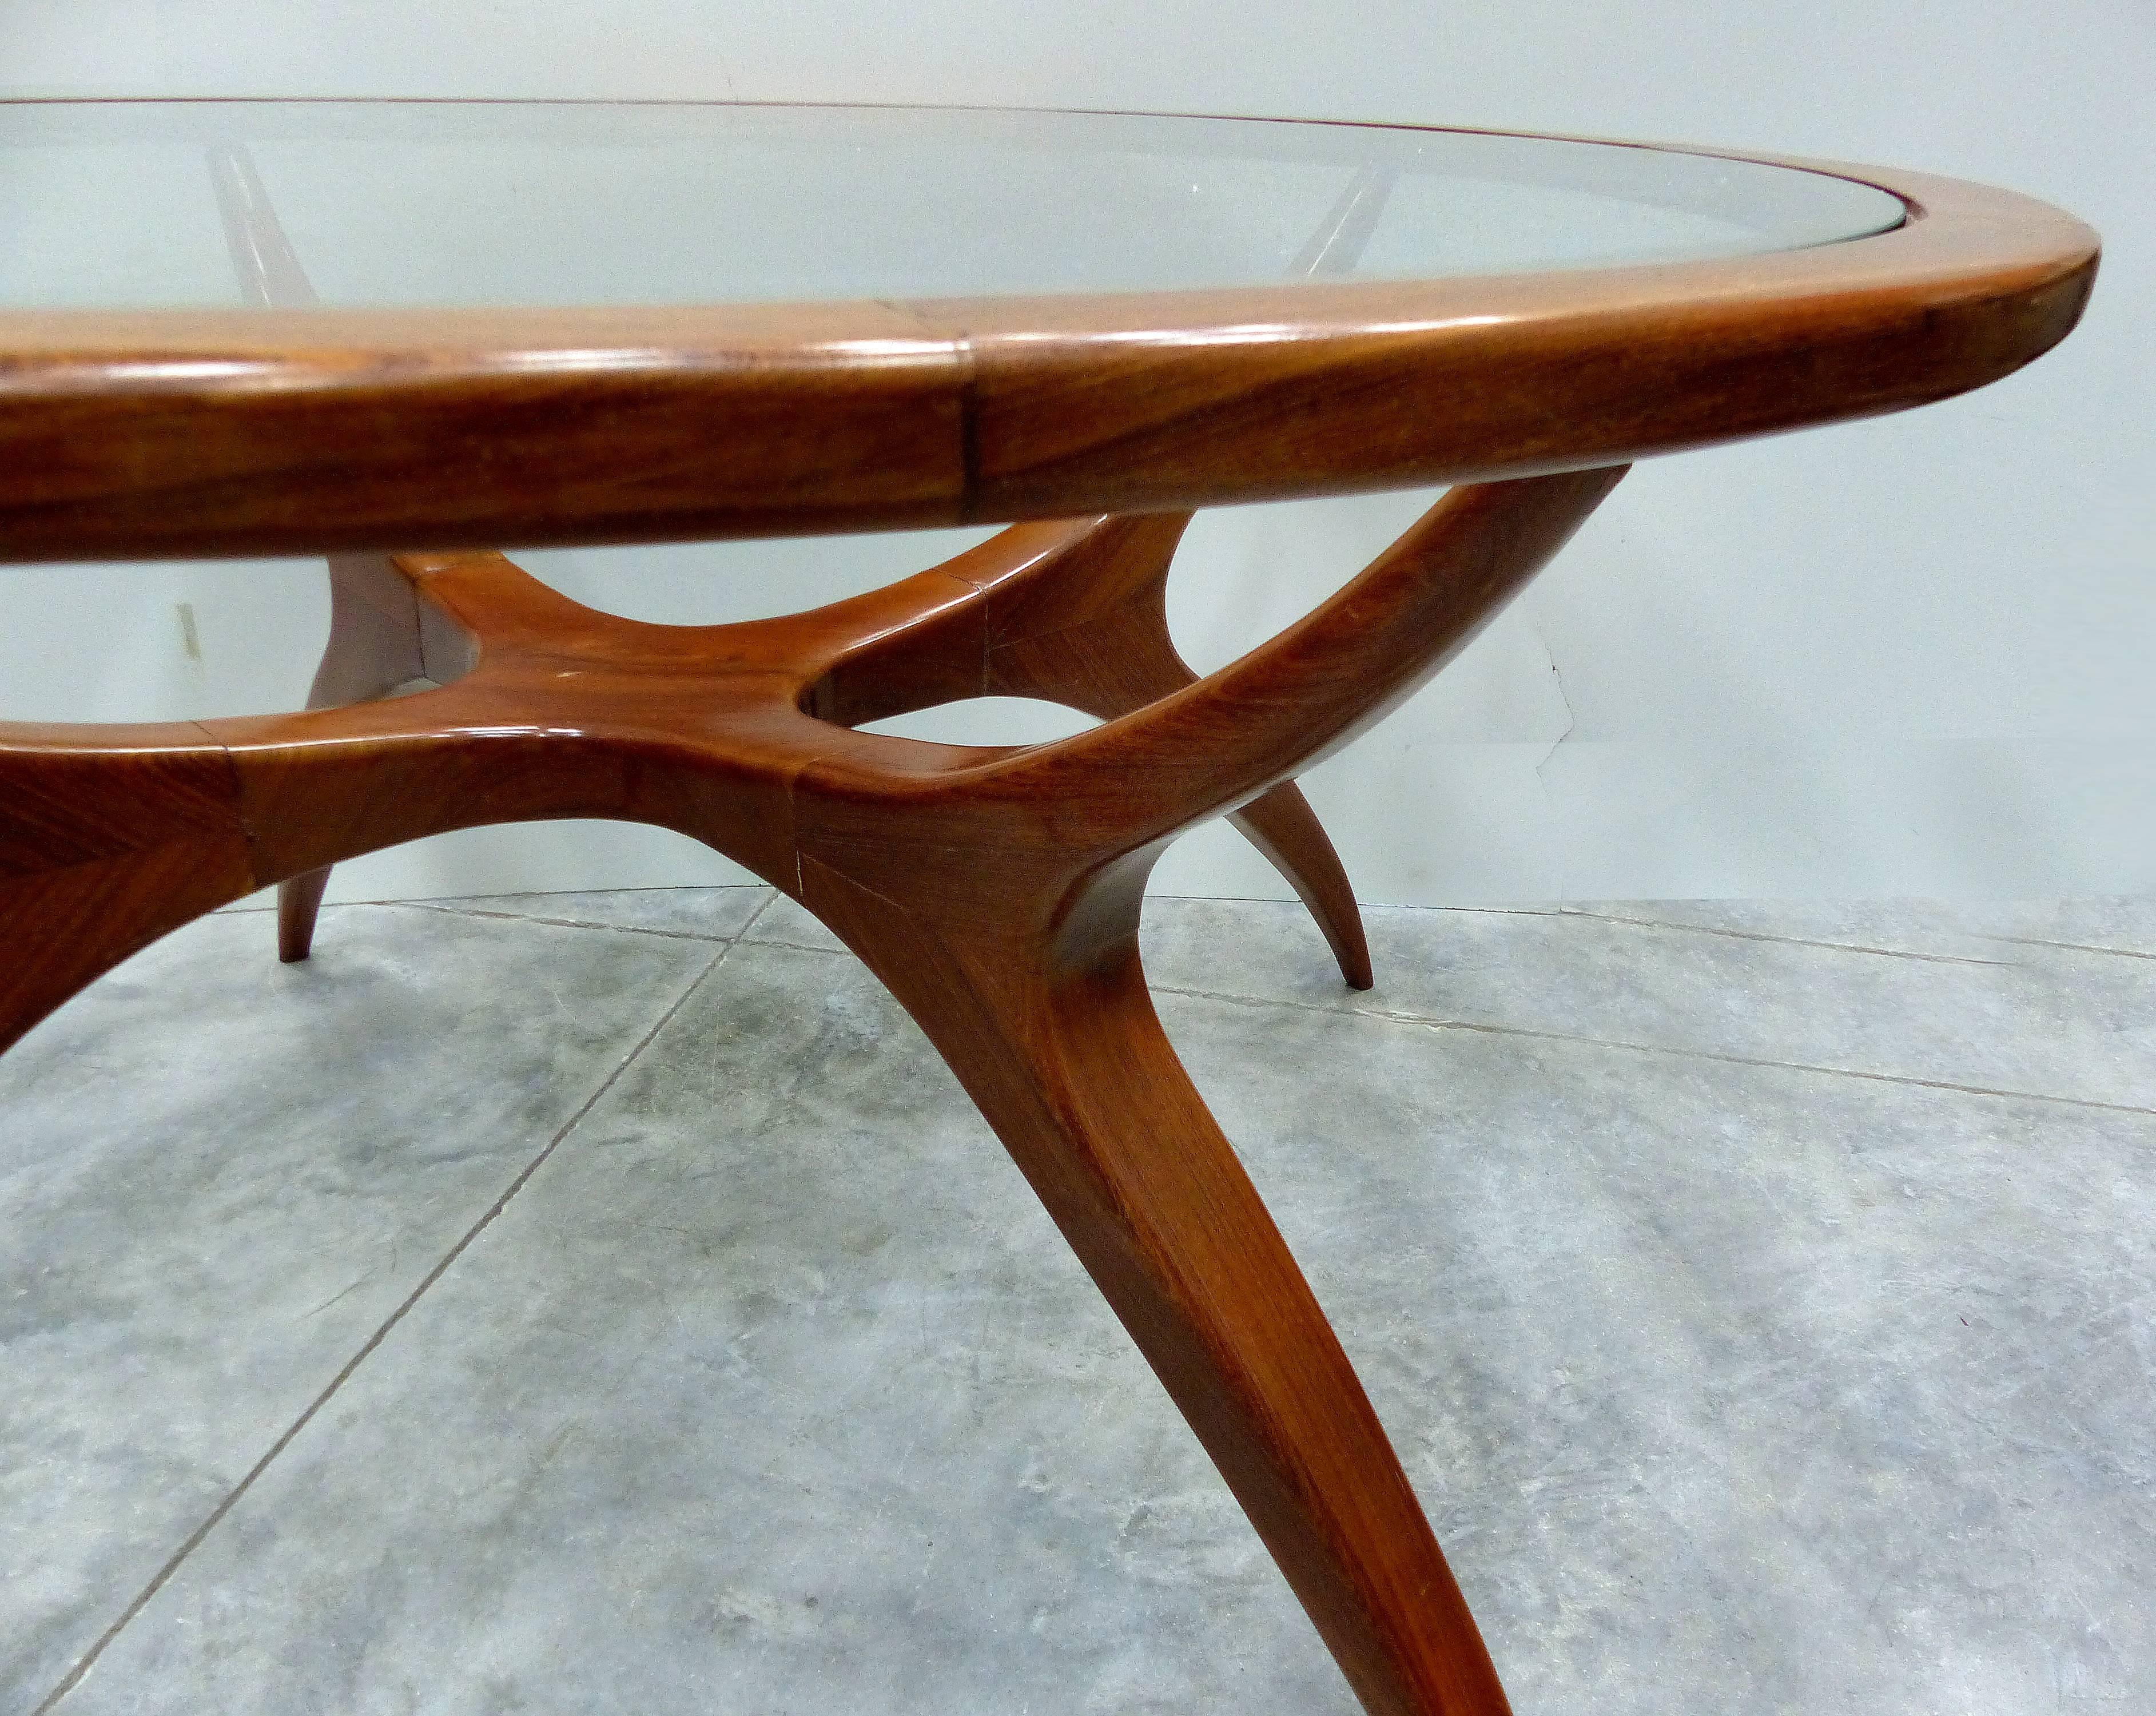 20th Century Sculptural Wood Table by Giuseppe Scapinelli, Brazil, 1960s